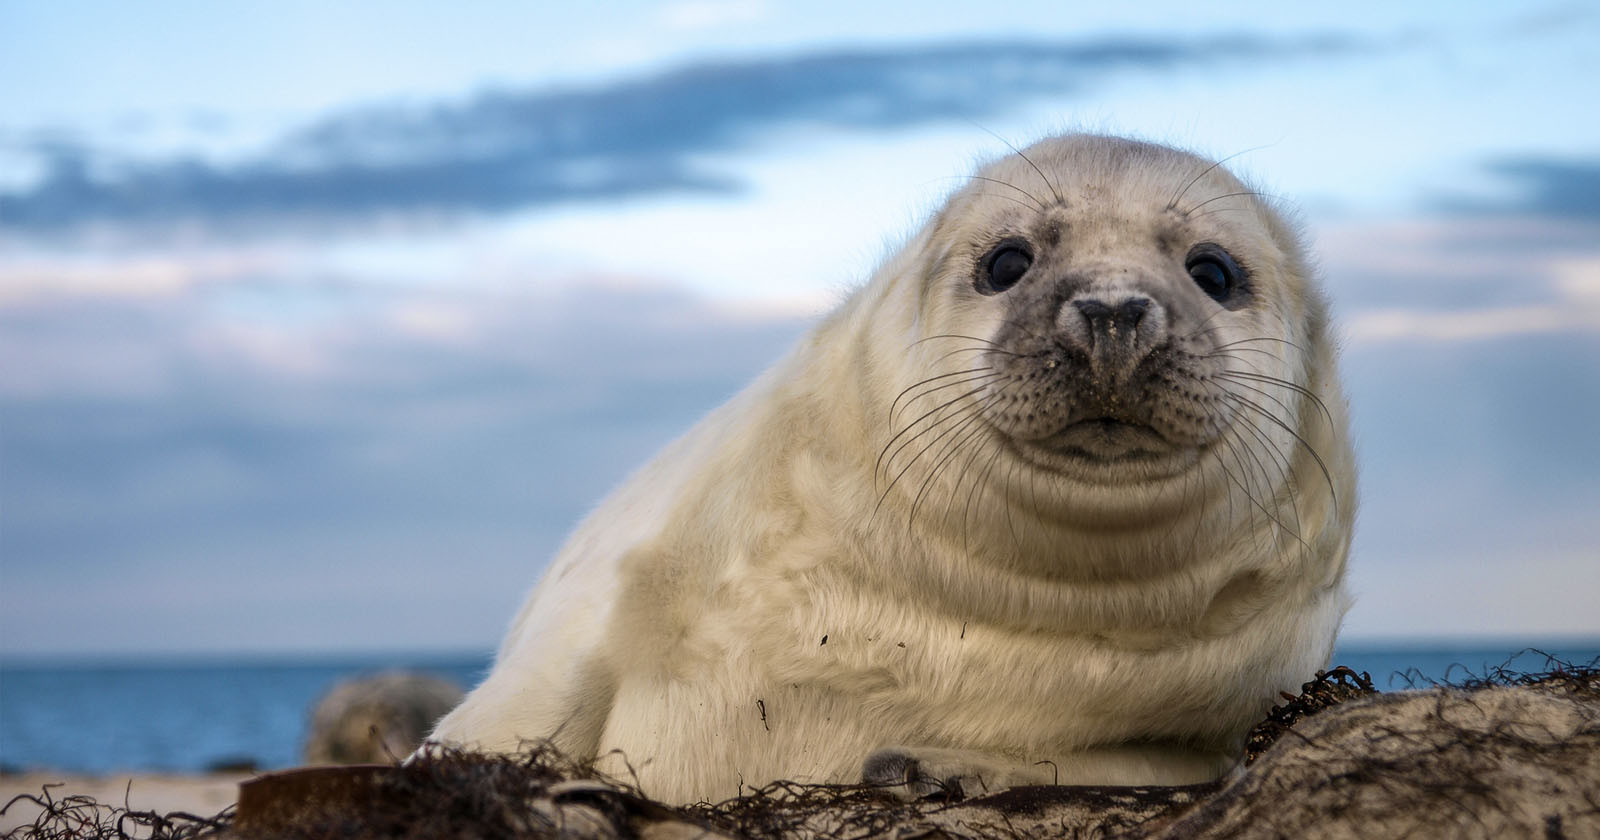 Tourists Accidentally Kill Seal Pup After Trying To Take Selfie With It